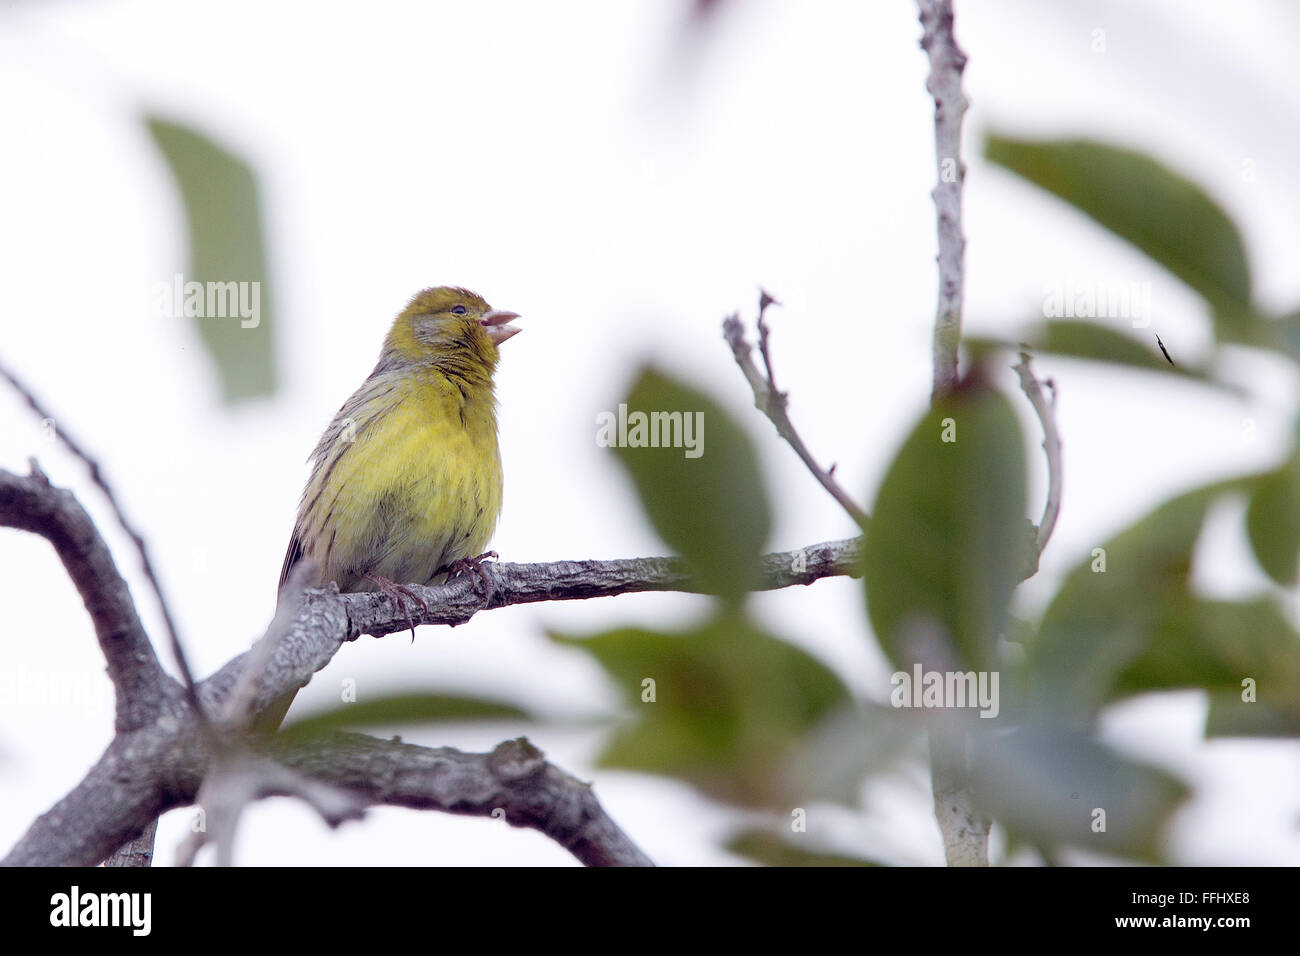 Atlantic Canary (Serinus canaria), male siging from perch, Tenerife, Canary Islands, Spain. Stock Photo